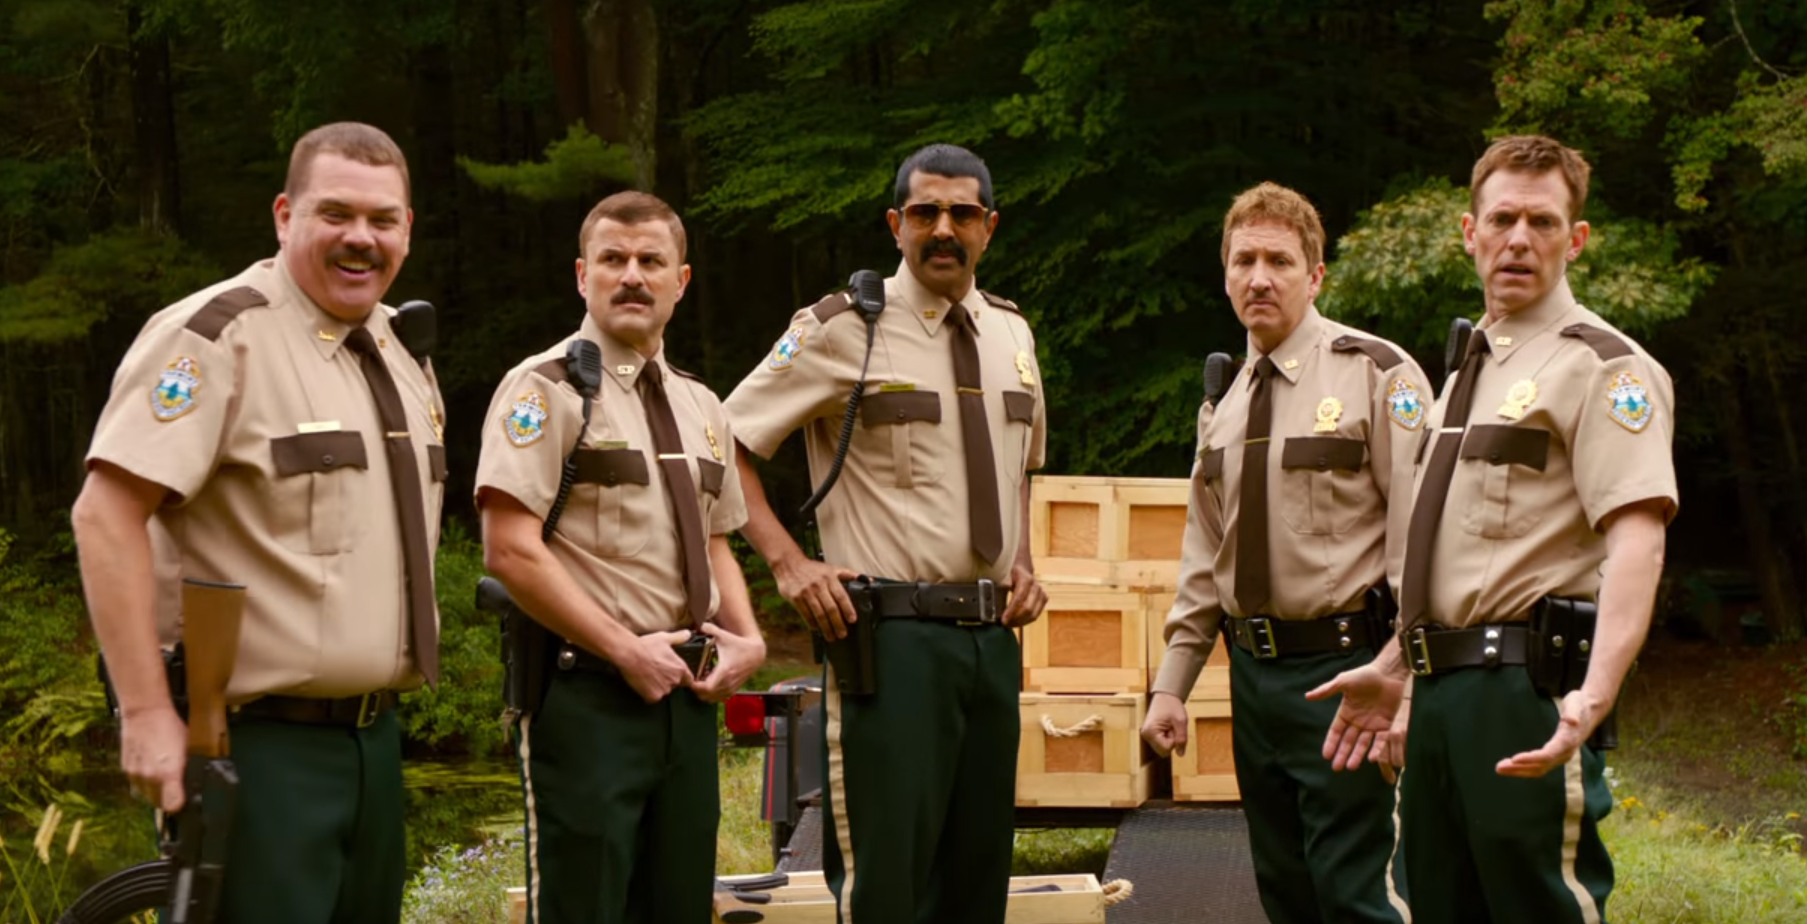 ‘Super Troopers 2’ Goes Canadian, Farva Finally Gets His Liter of Cola!